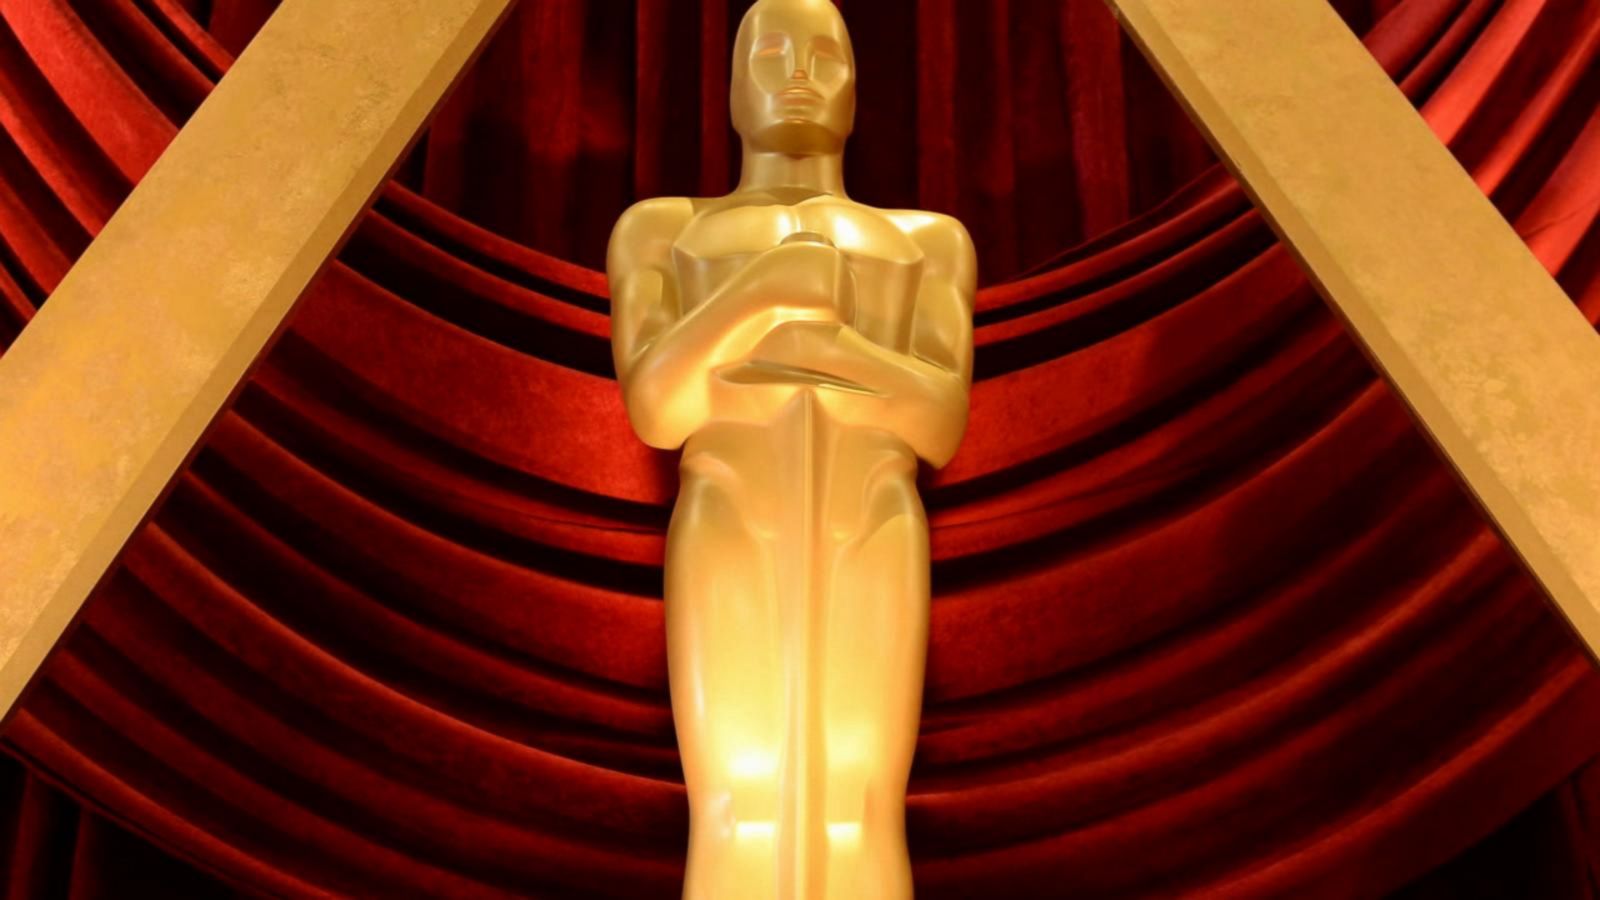 Front runners for the 2022 Oscars Good Morning America